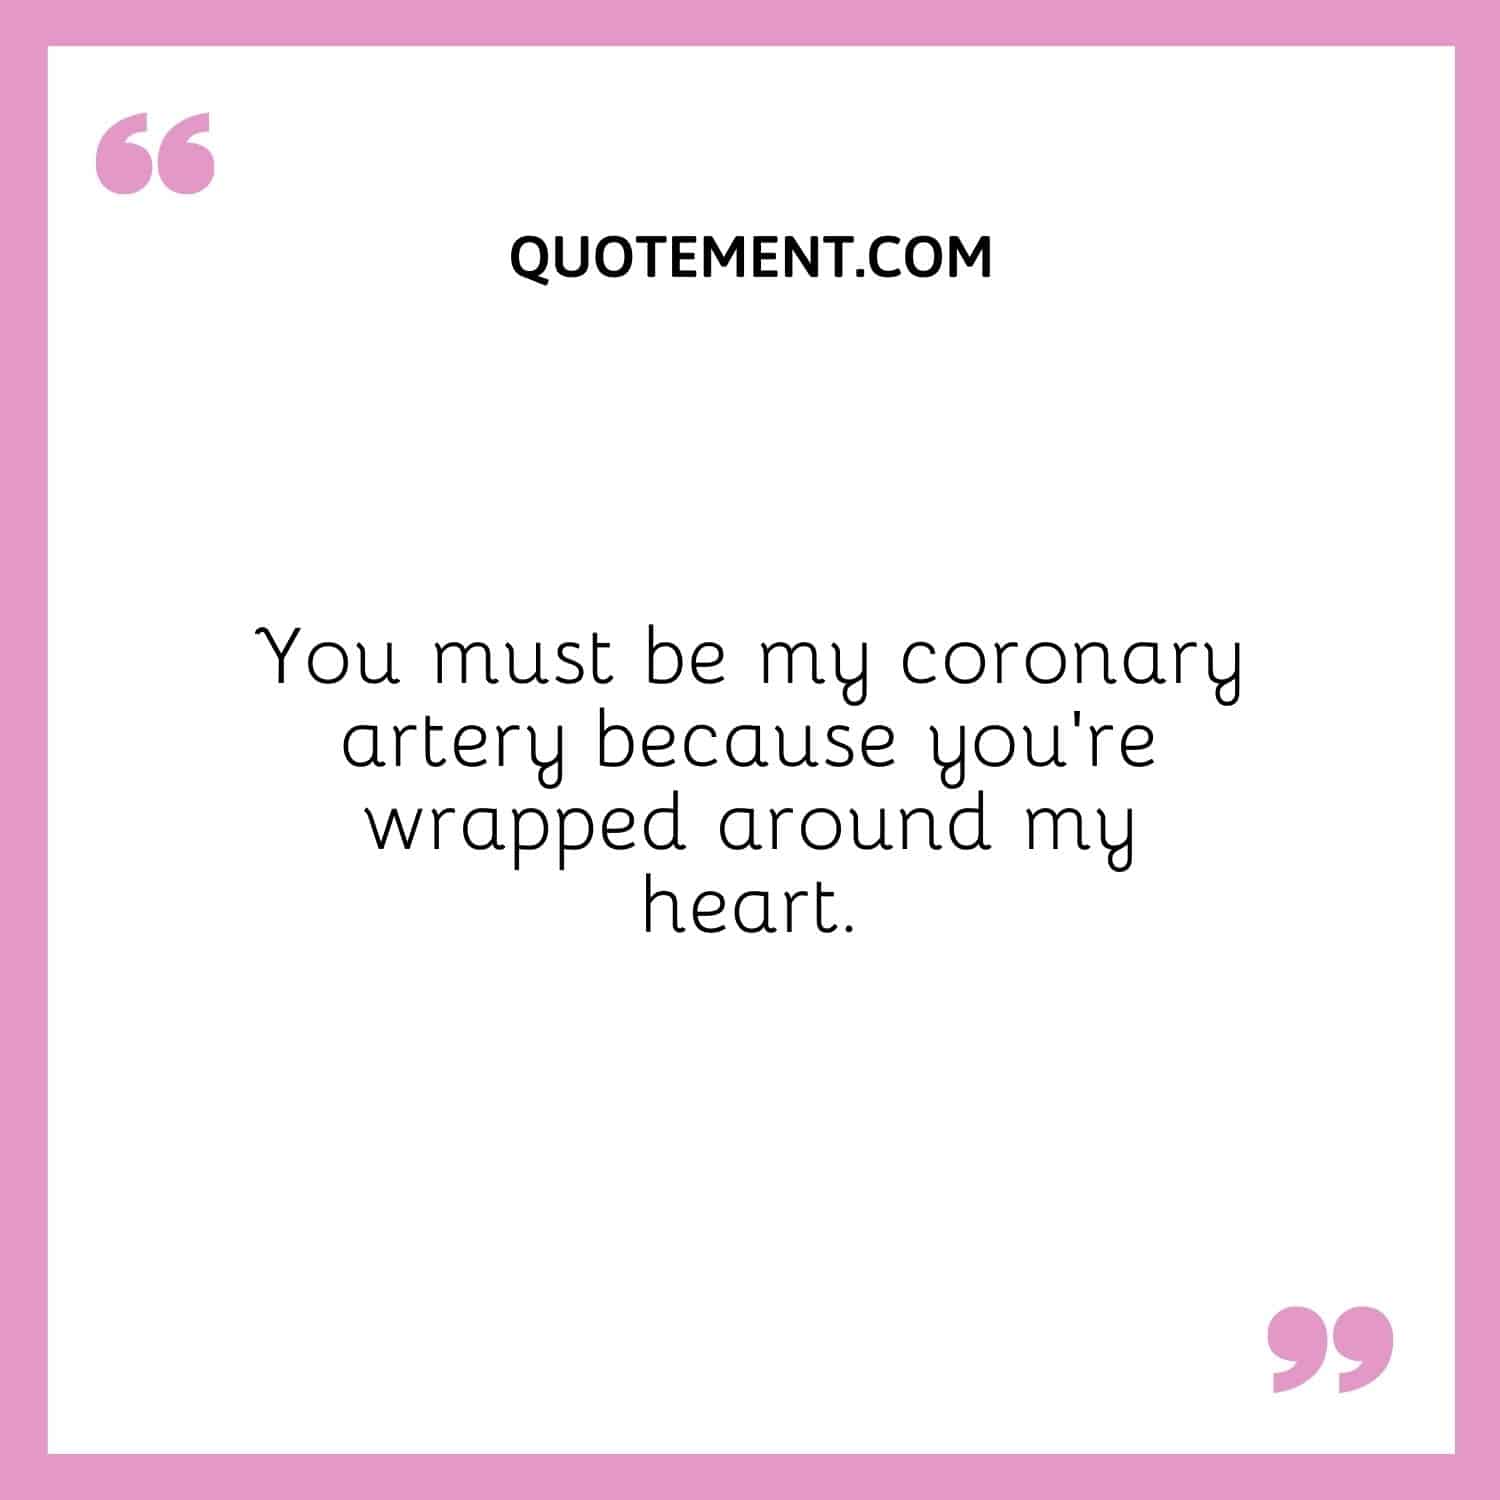 You must be my coronary artery because you’re wrapped around my heart.